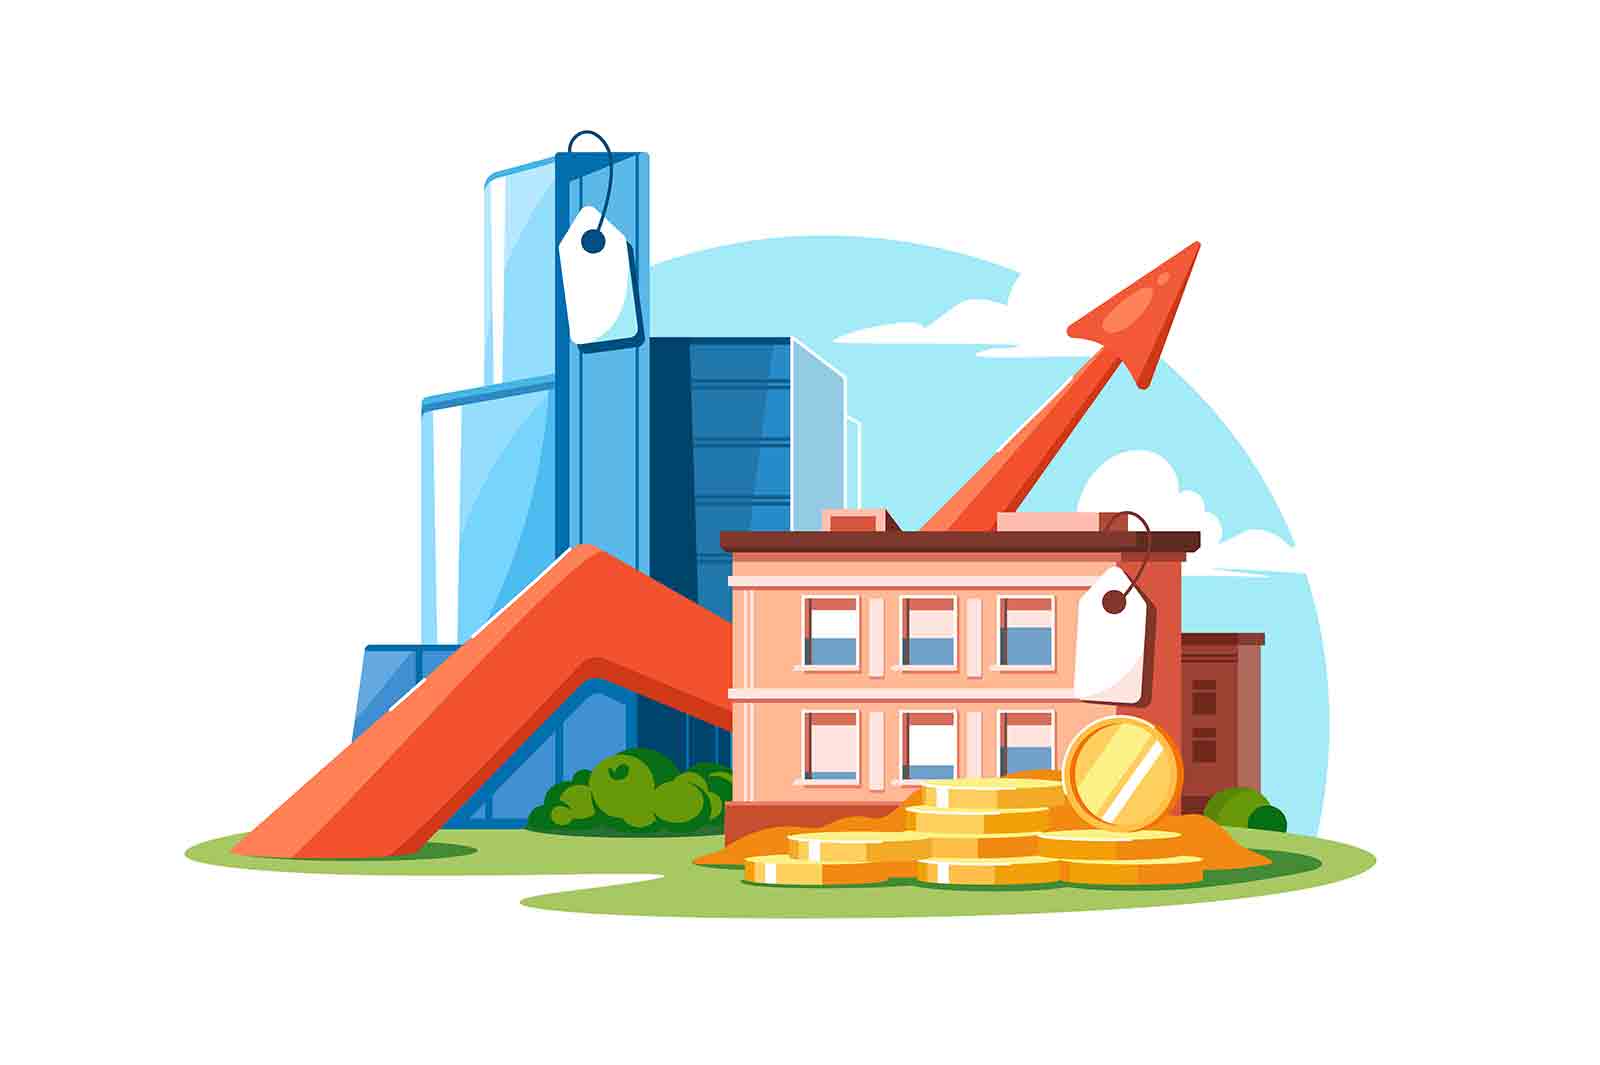 City buildings golden coins and up arrow vector illustration. Rise in property prices flat style concept. Property market idea